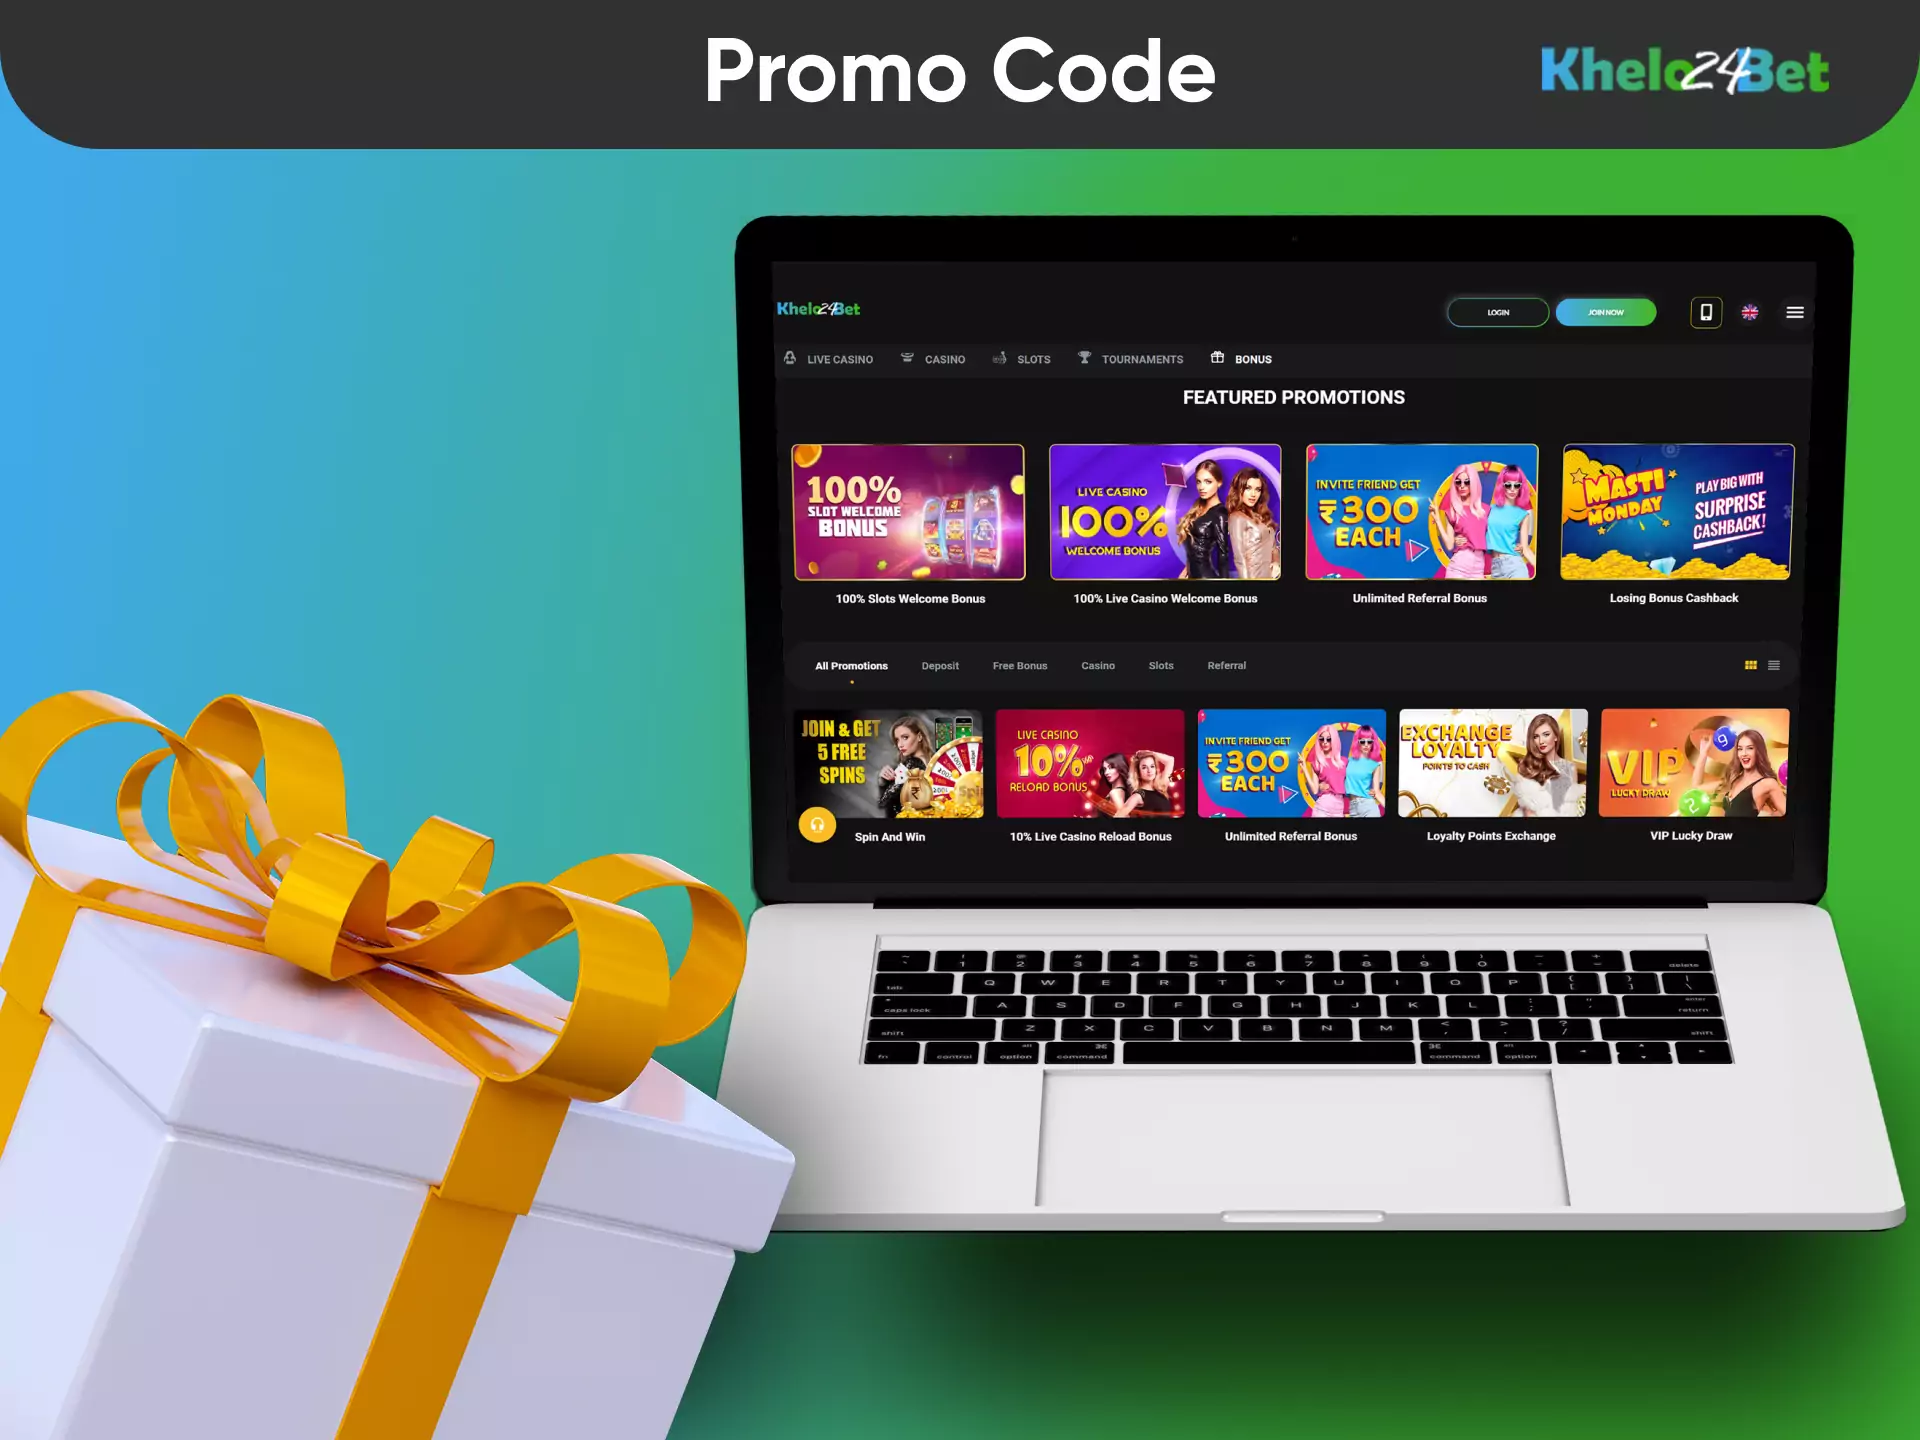 Use a promo code to increase your profit from using the Khelo24bet site.